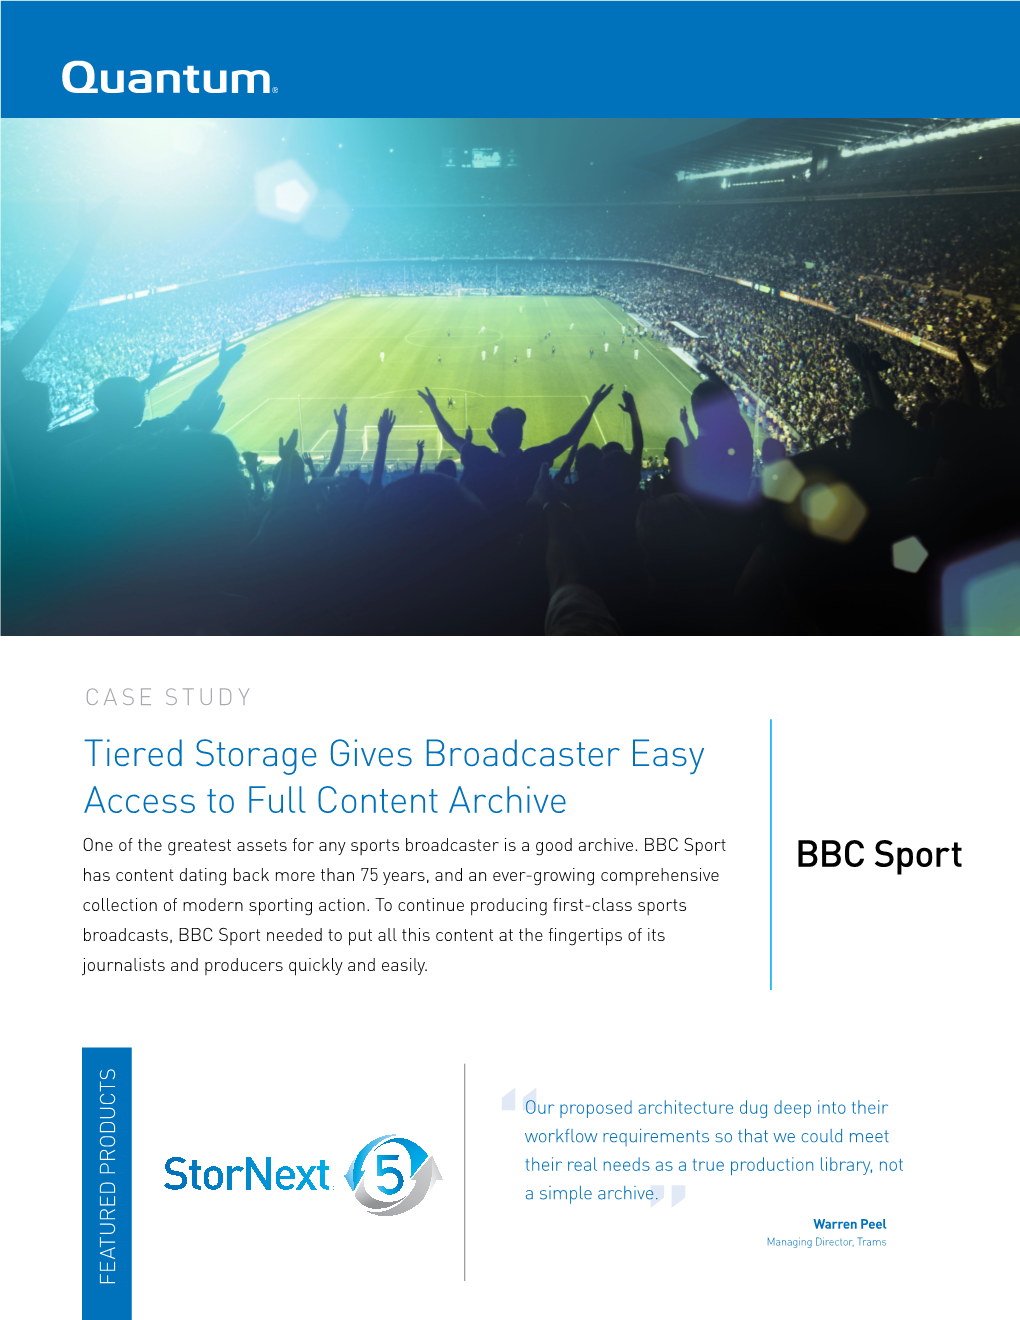 Tiered Storage Gives Broadcaster Easy Access to Full Content Archive One of the Greatest Assets for Any Sports Broadcaster Is a Good Archive